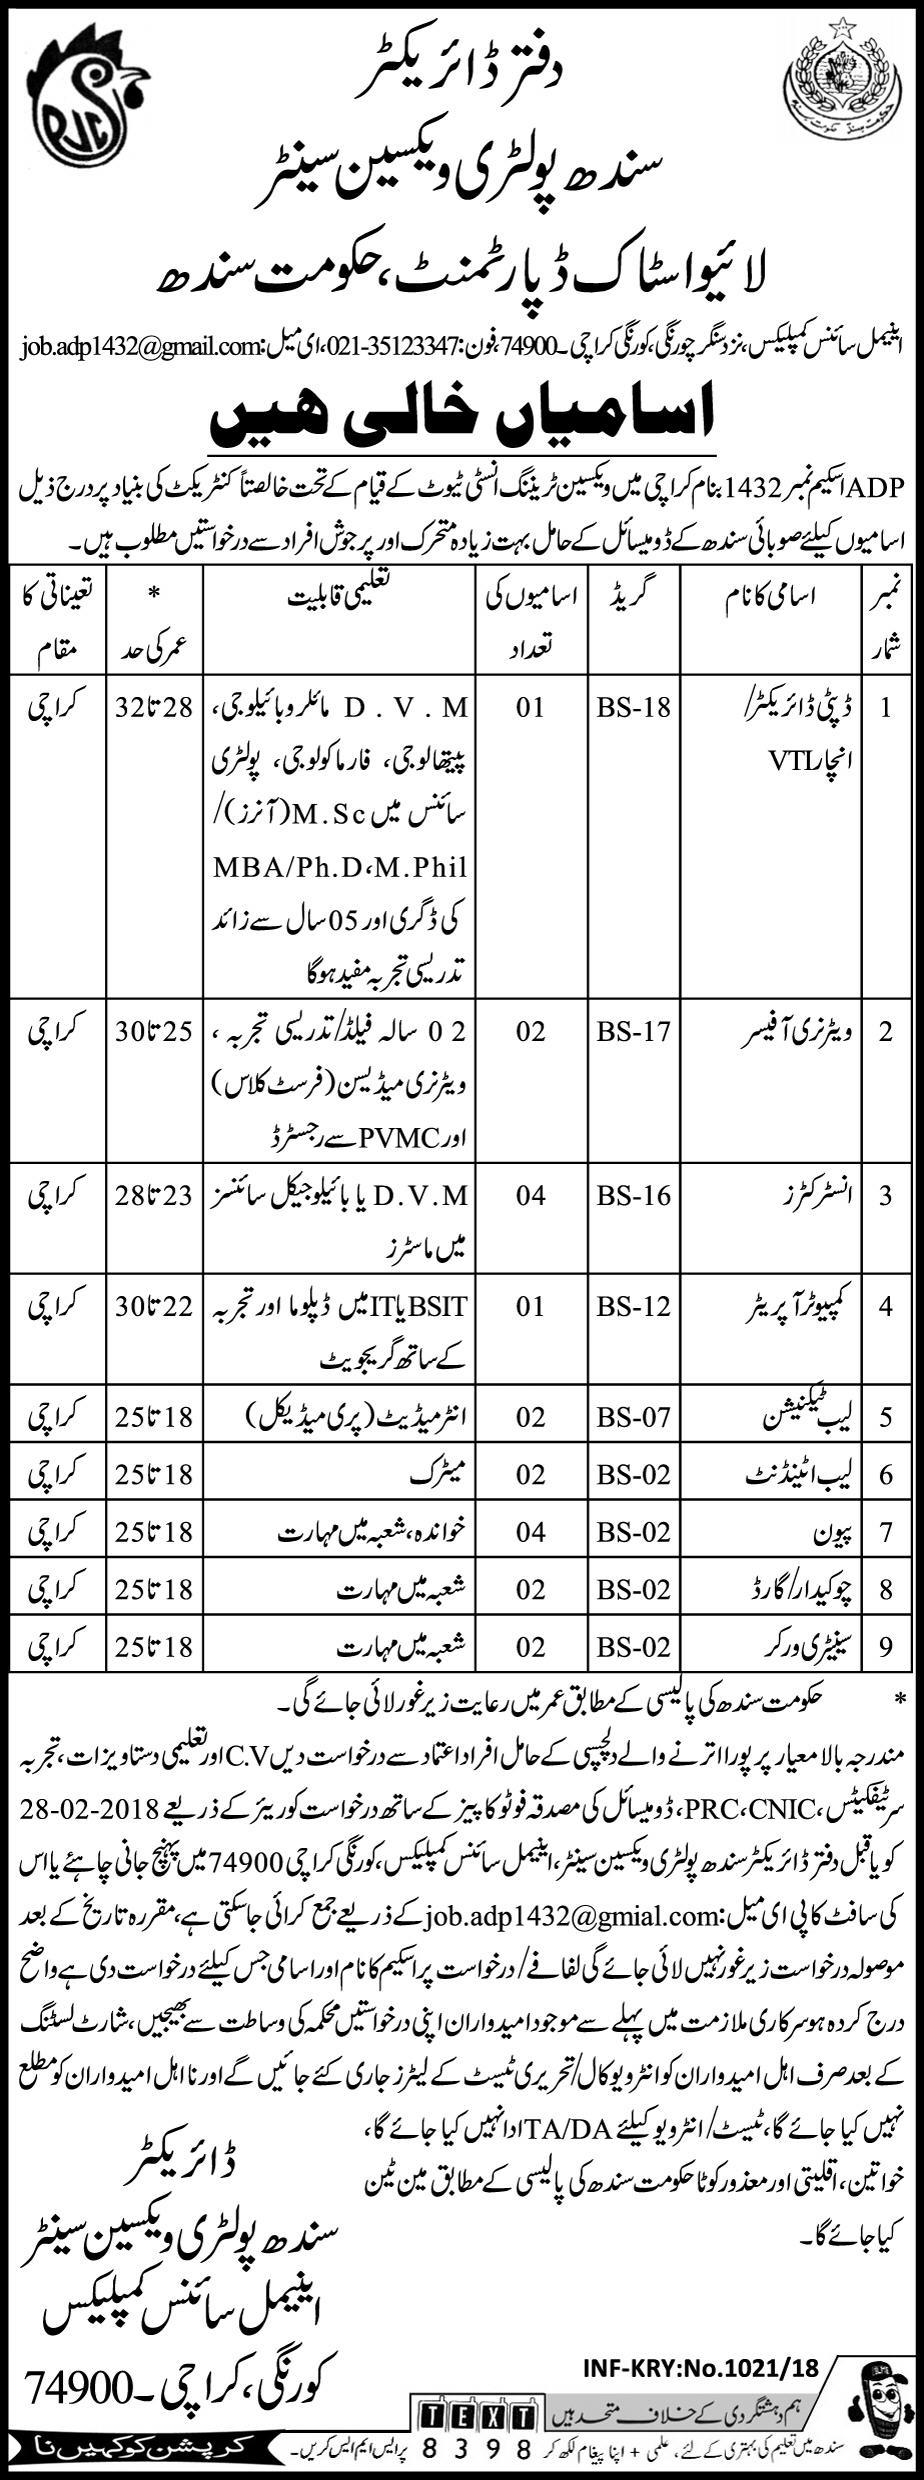 Jobs In Sindh Poultry Vaccination Center Livestock Department 21 Feb 2018